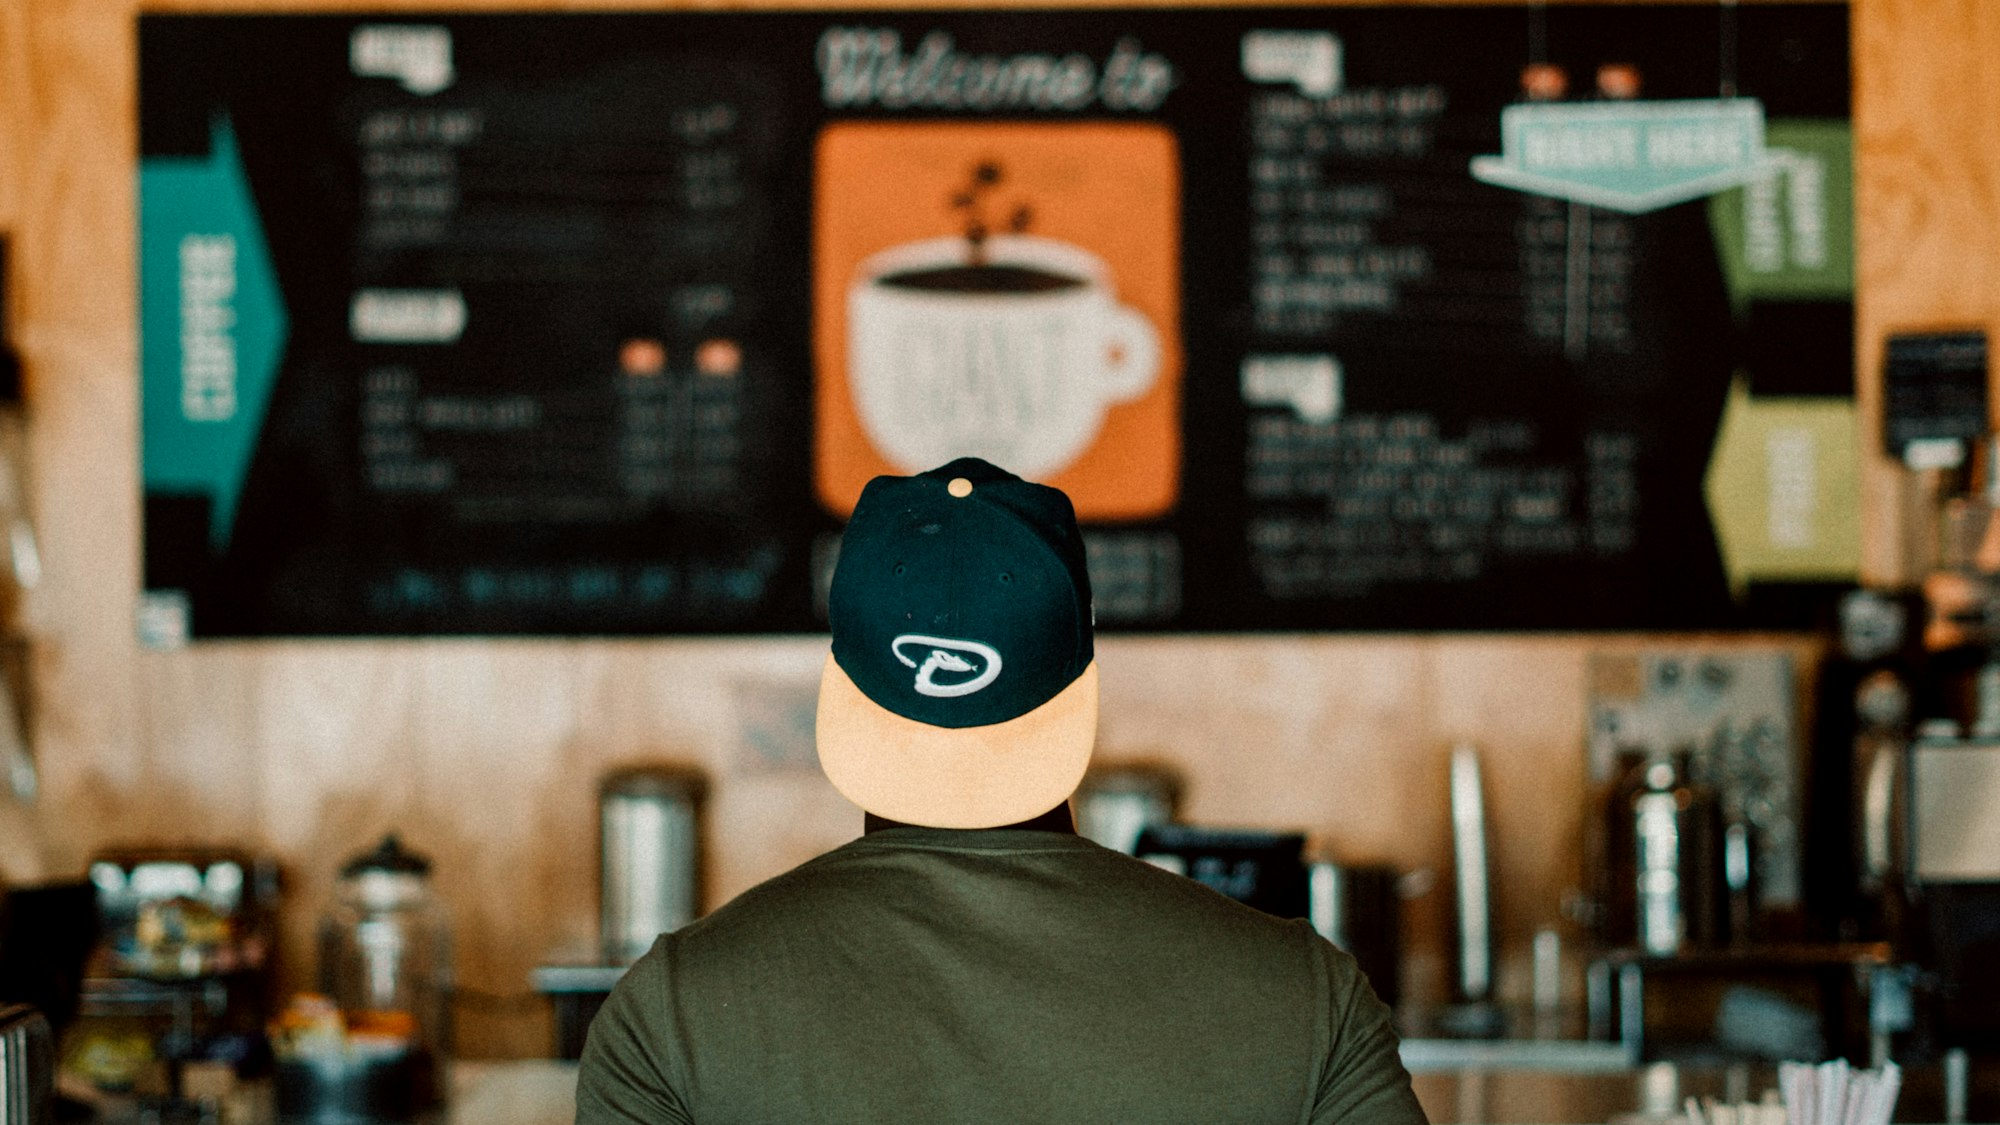 A person with a backwards baseball cap stands in front of coffee shop menu board, blurred and out of focused. 